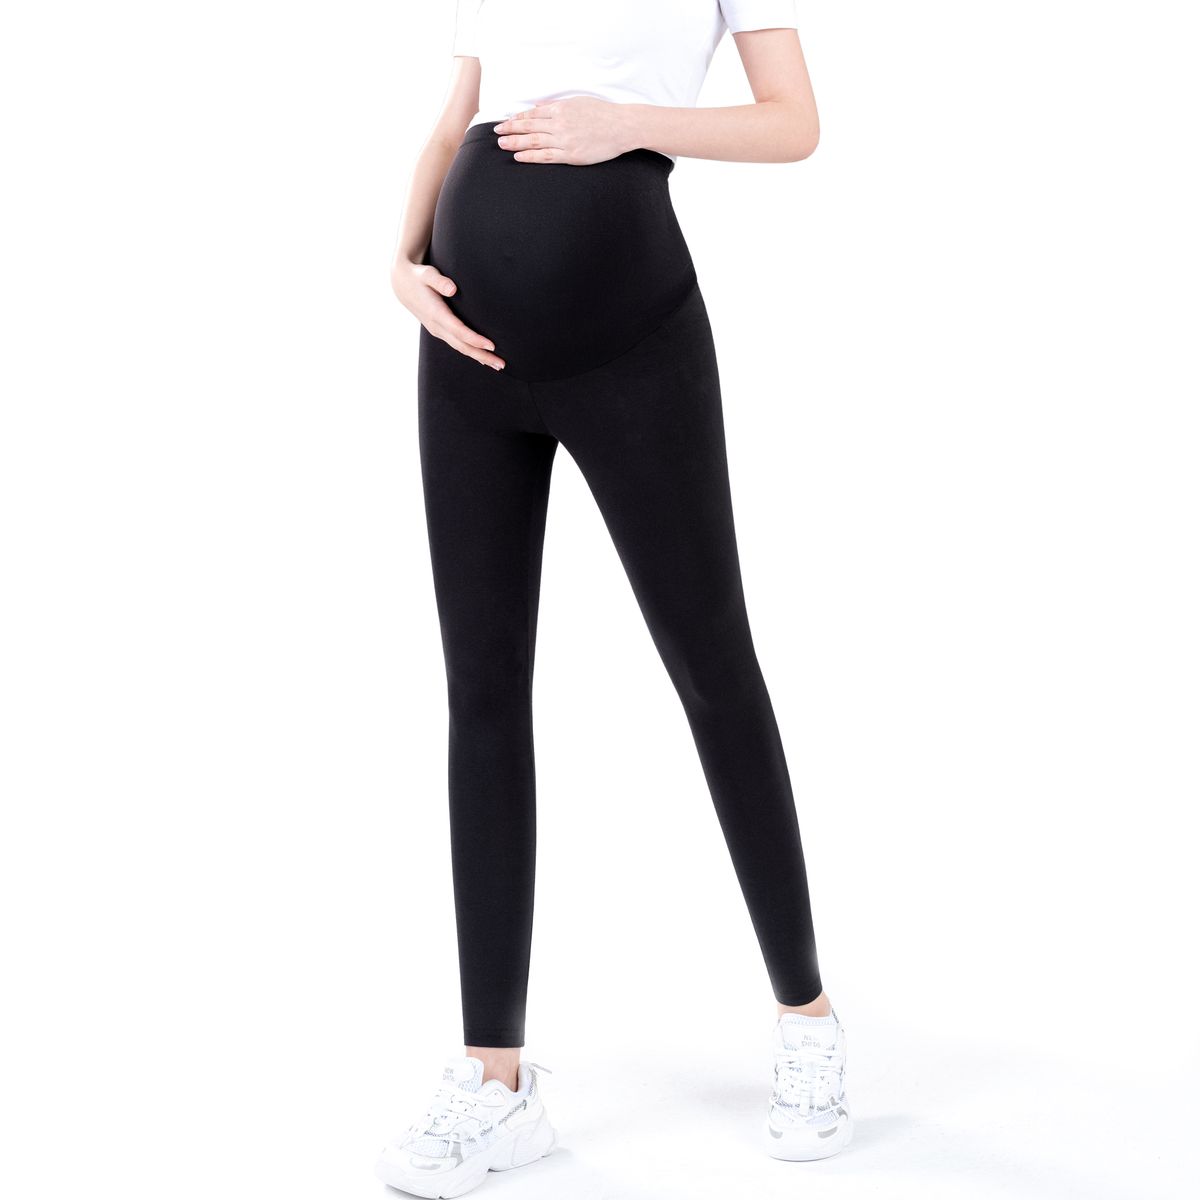 Carriwell Maternity Support Leggings - Happy Baby